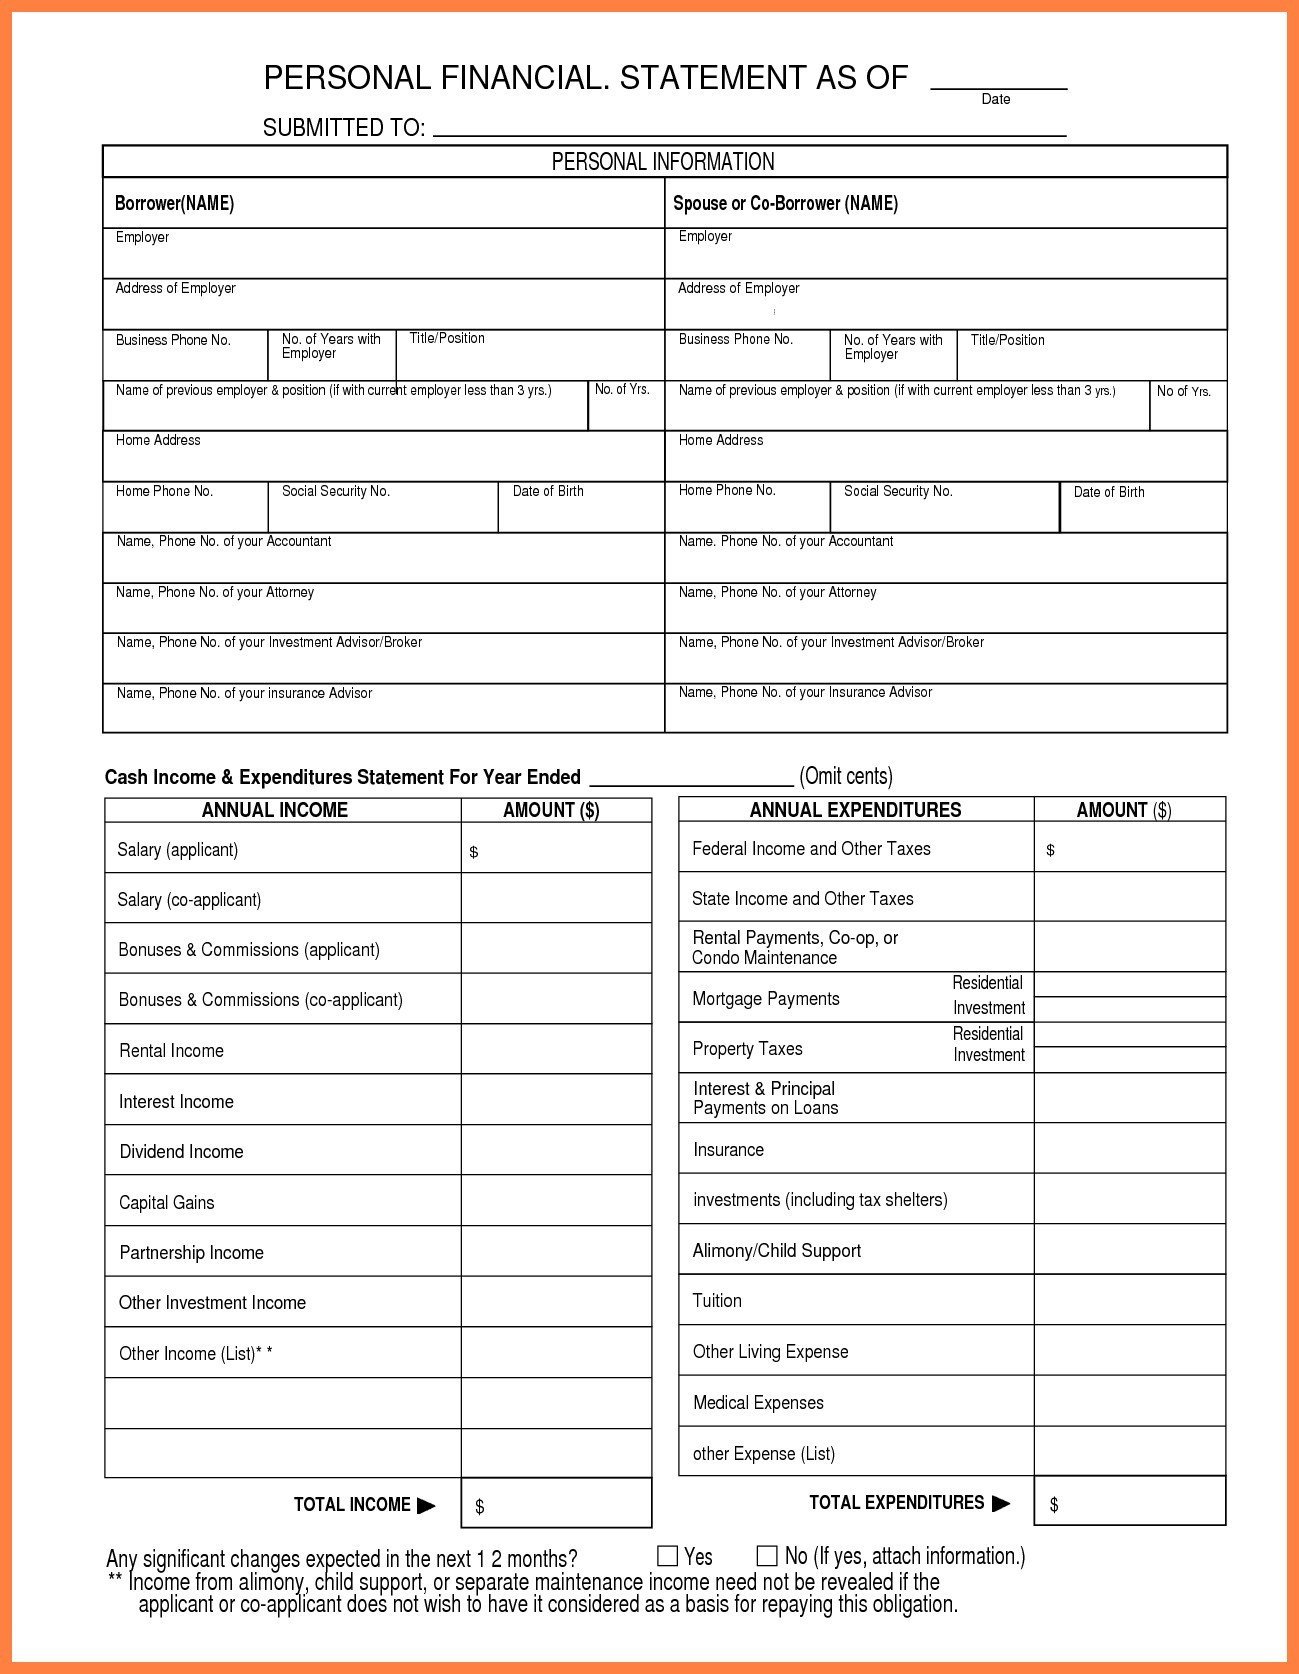 Blank Personal Financial Statement Free Personal Financial Statement Template Download form